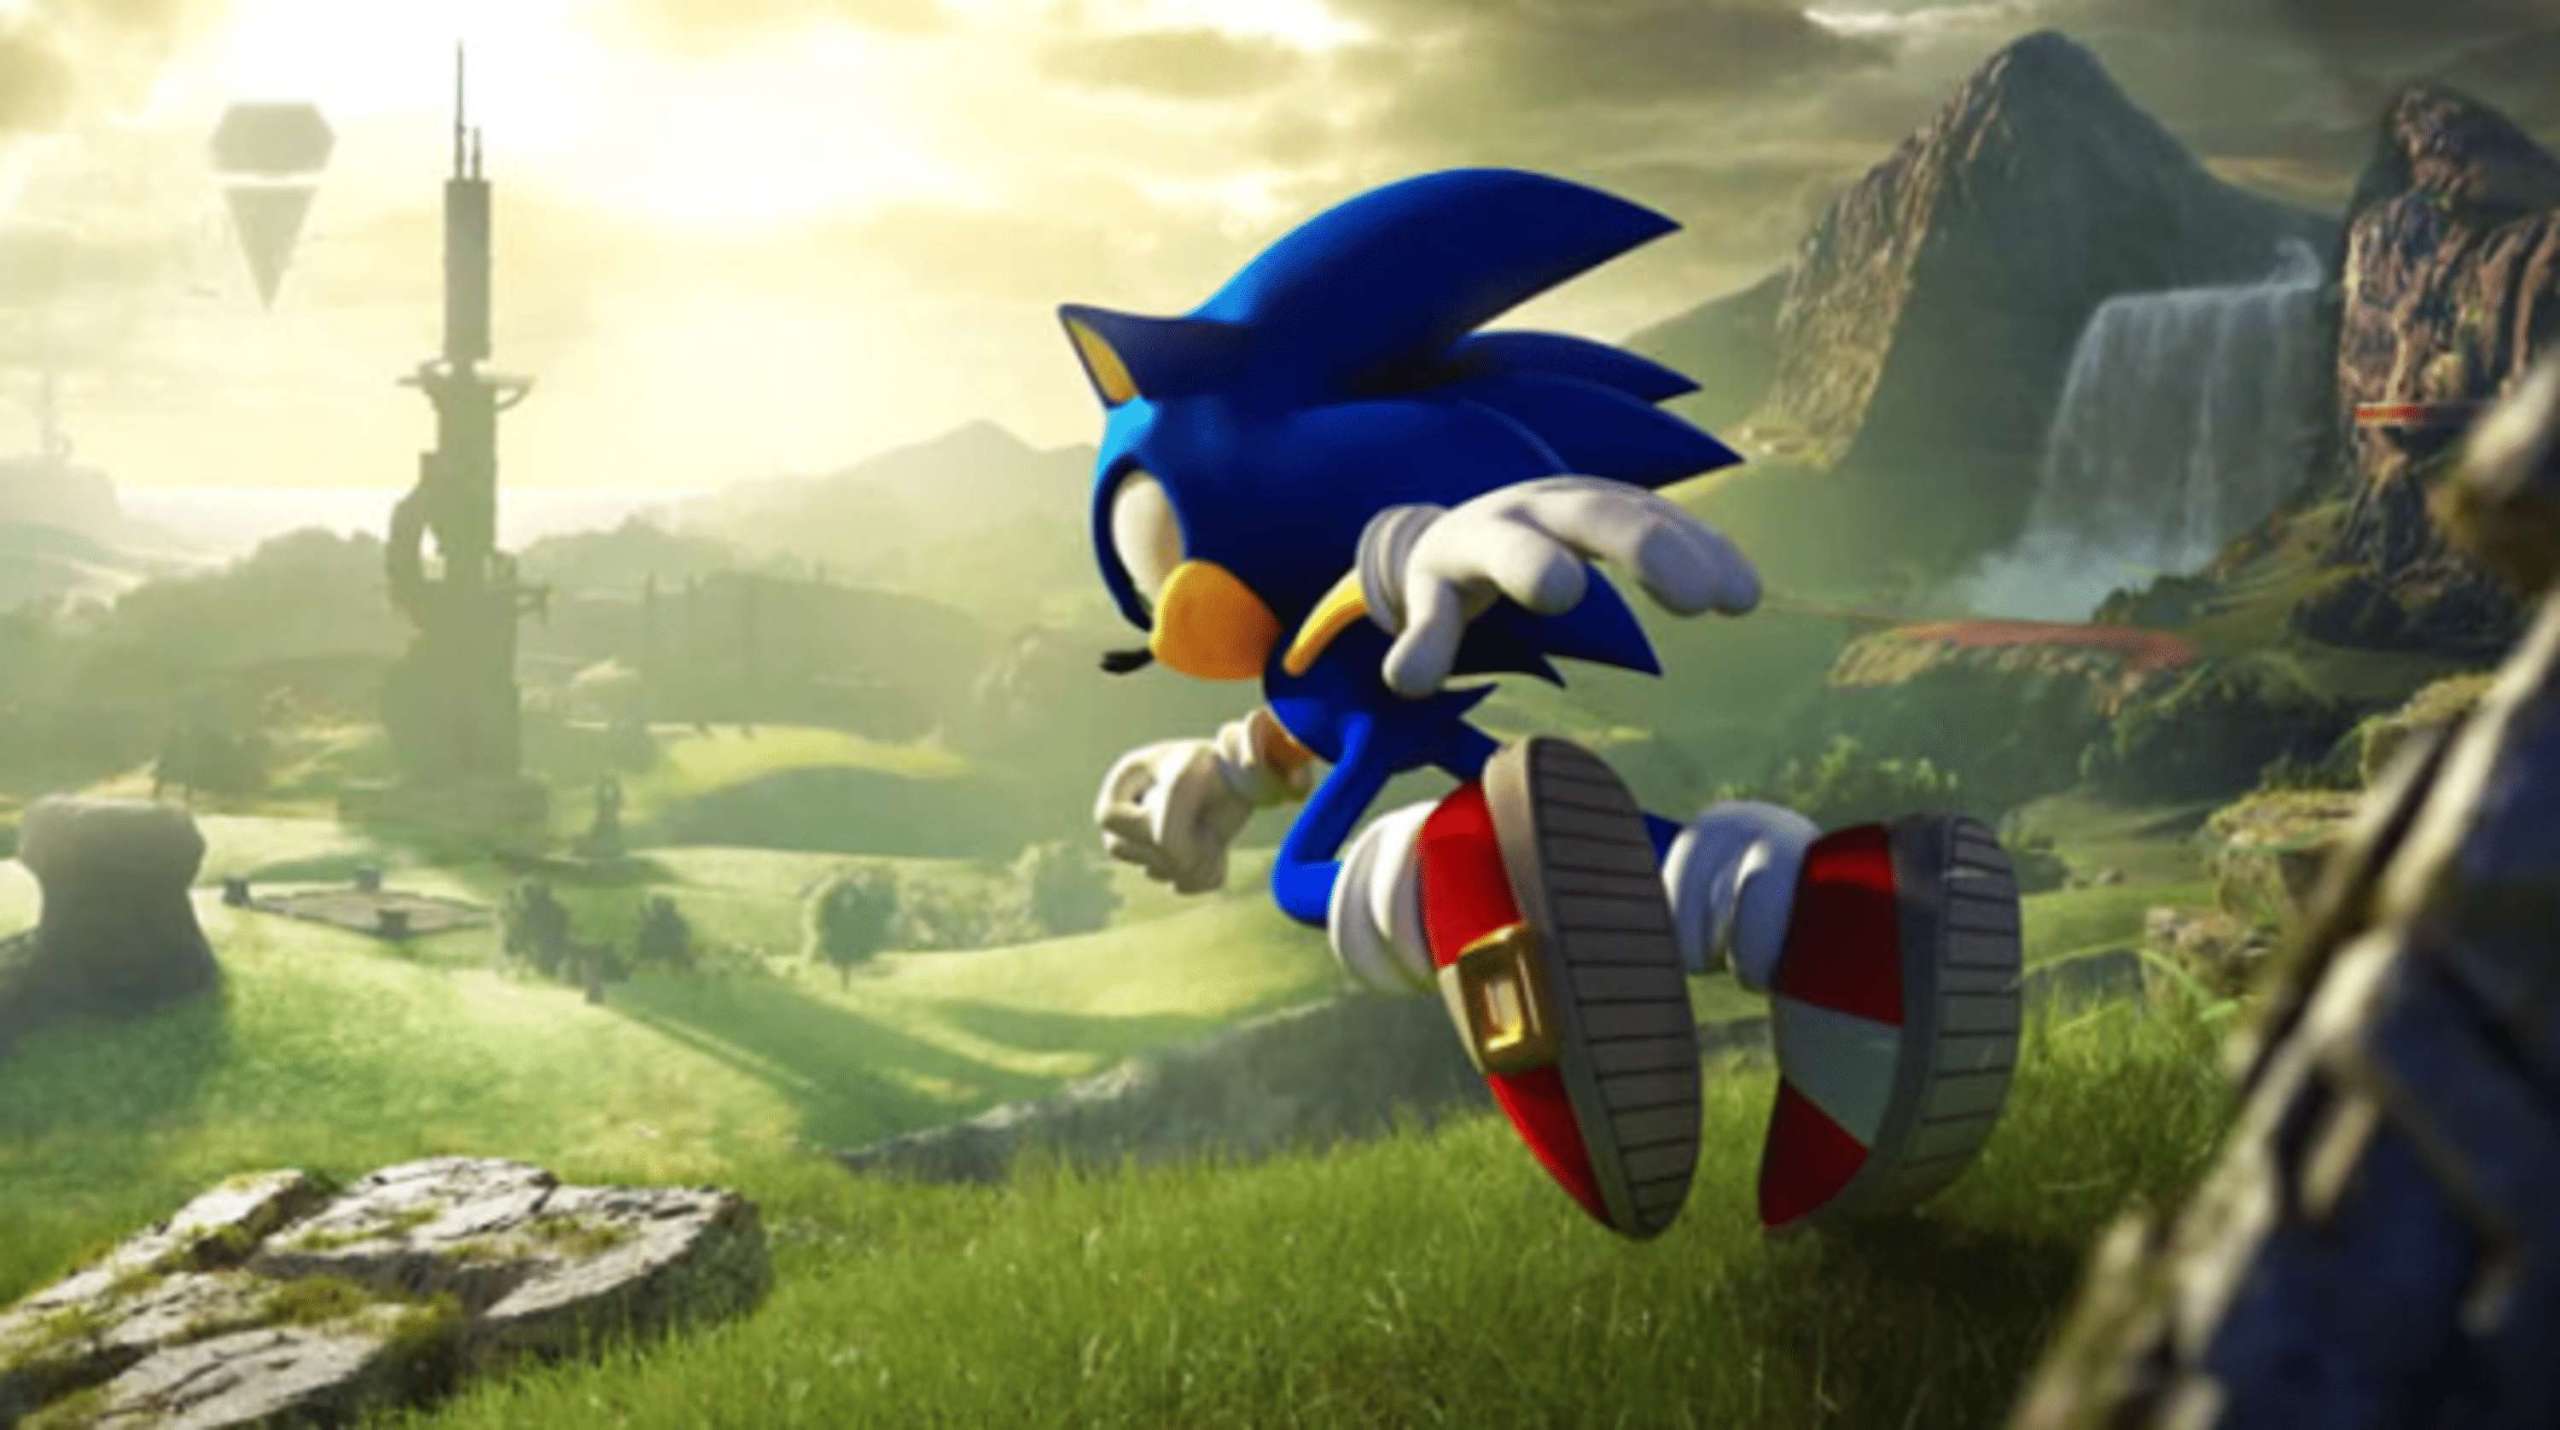 The Game’s Music Selection Of 150 Tracks Is The Largest Of Any Sonic Game To Date